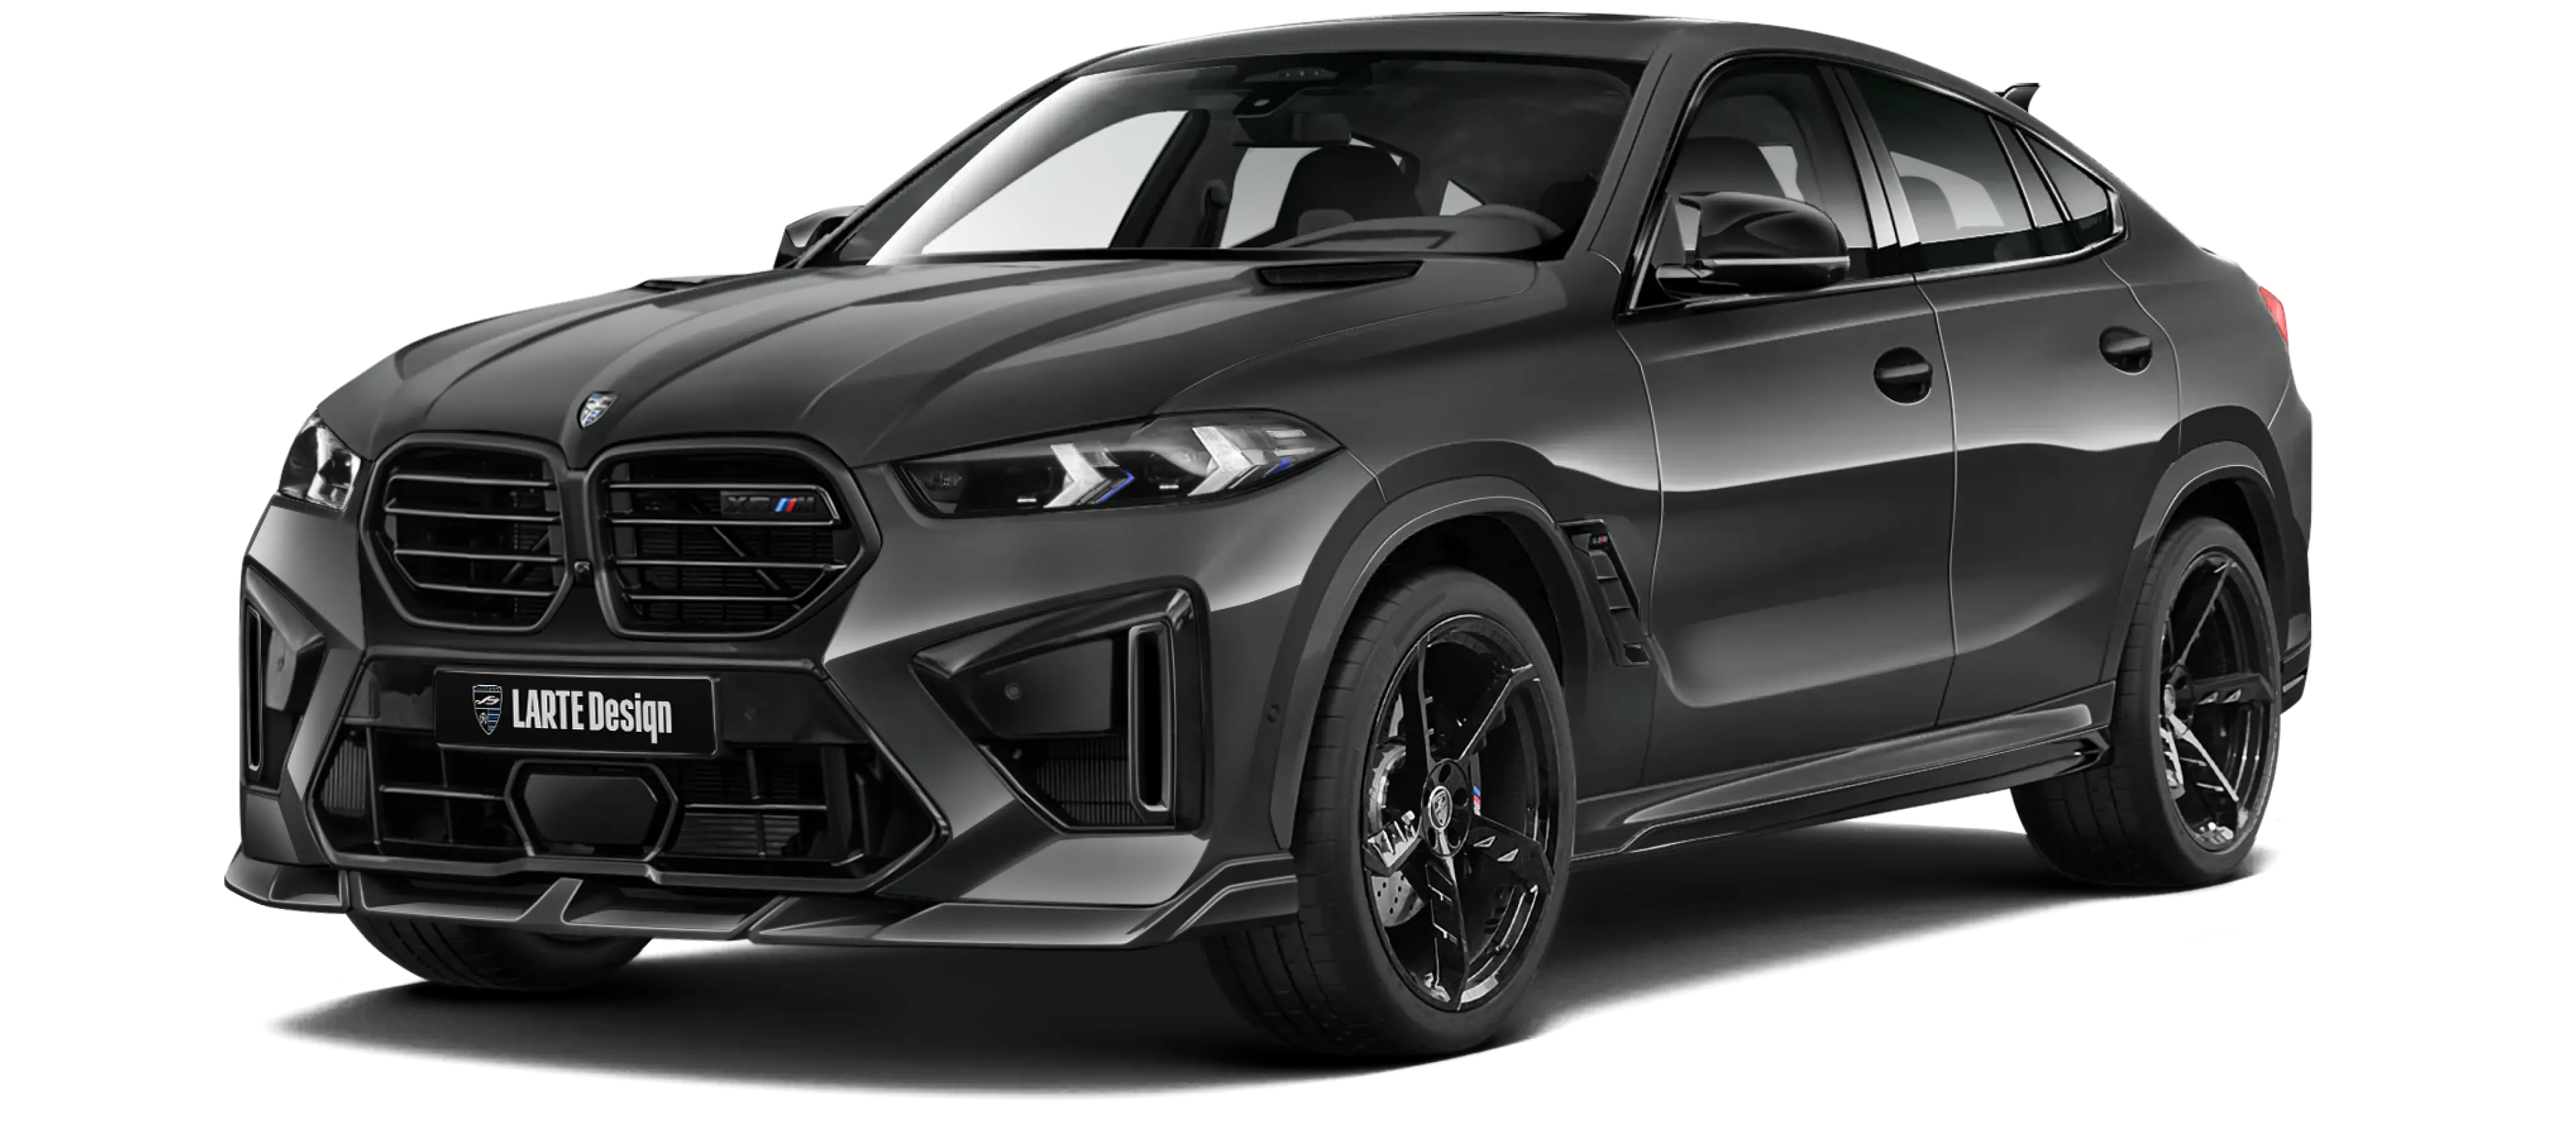 BMW X6M F96 LCI 2023 with painted body kit: front view shown in Dravit grey